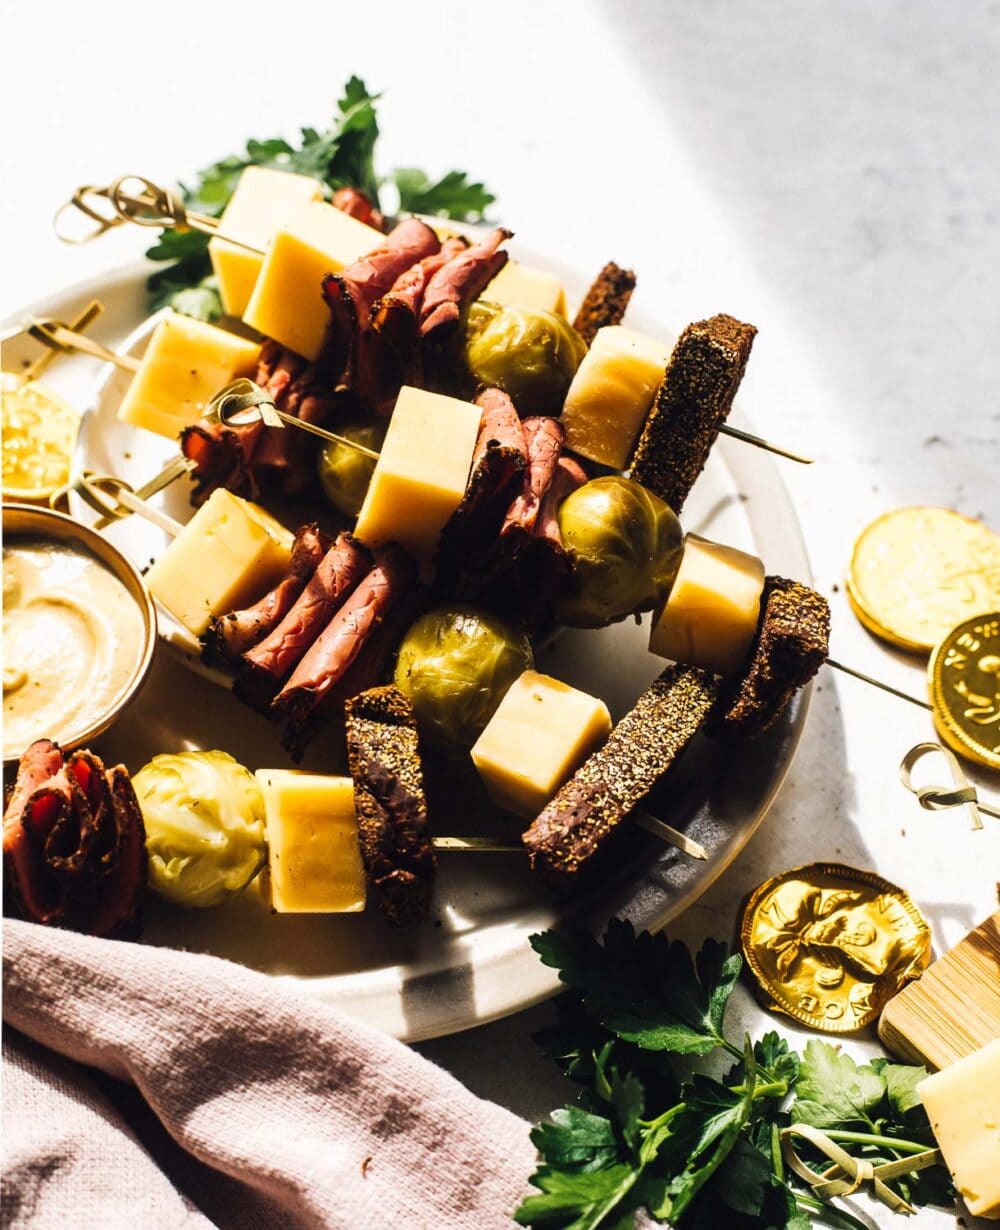 skewers with pastrami, pickled brussels sprouts, cheese, rye bread on a white plate